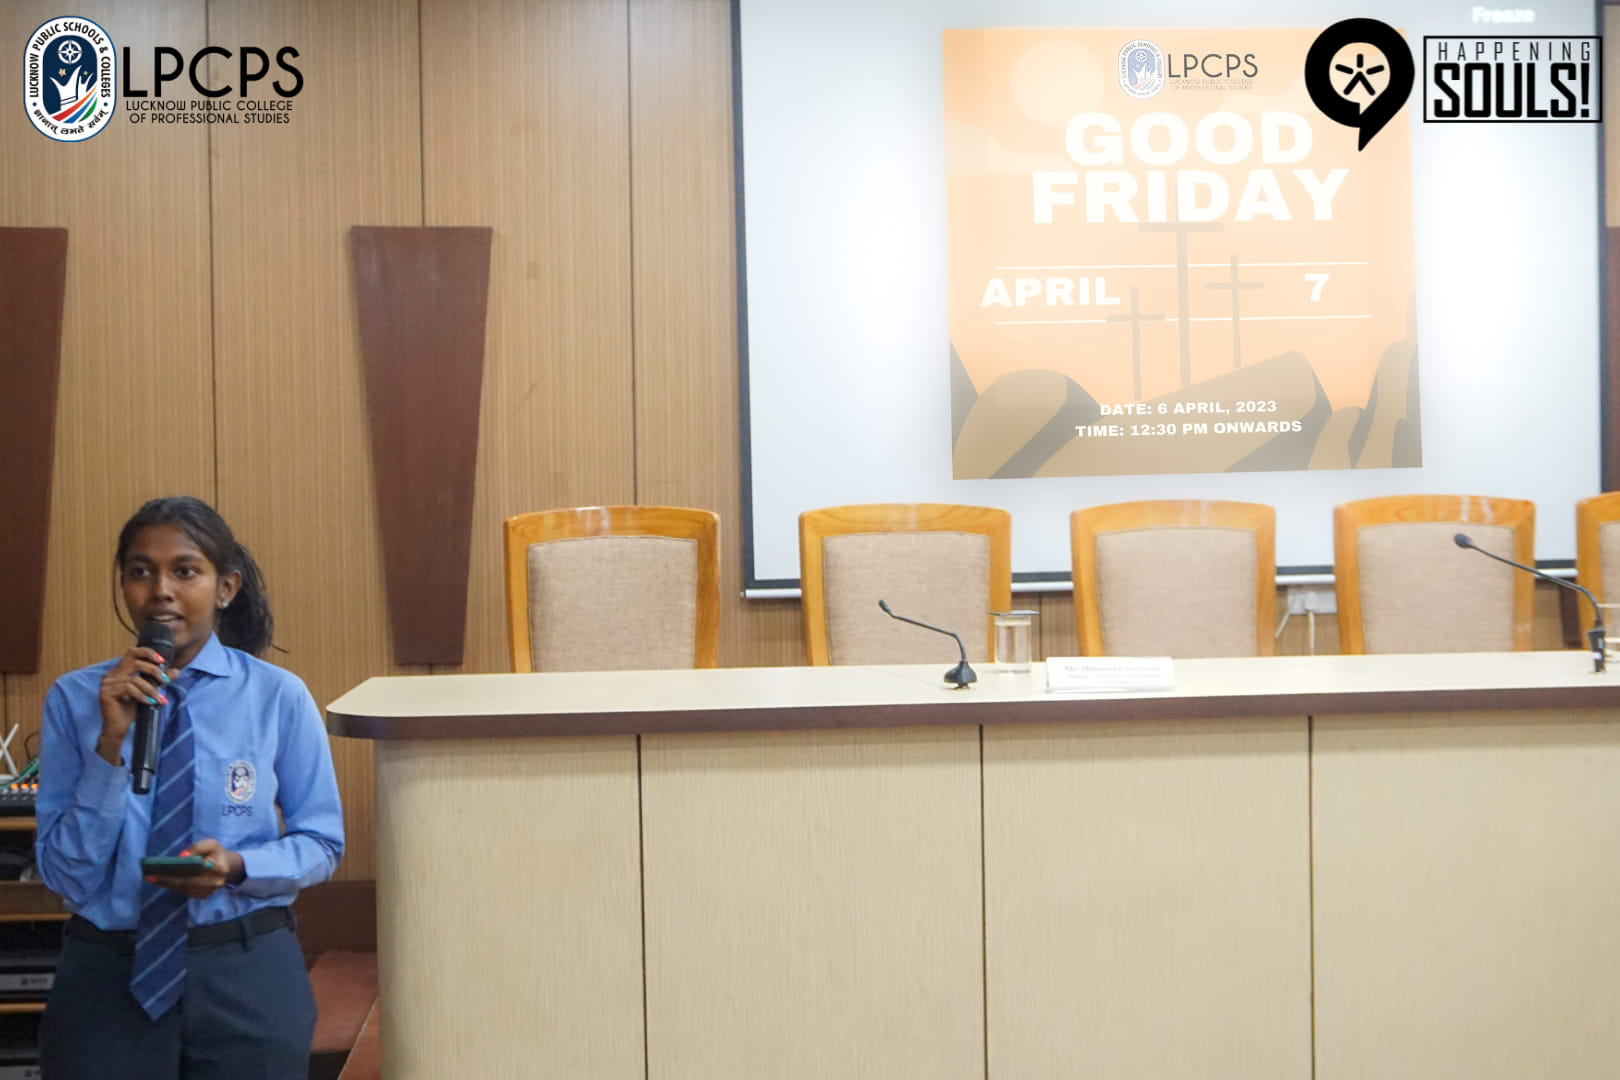 Session  on 'Good Friday'